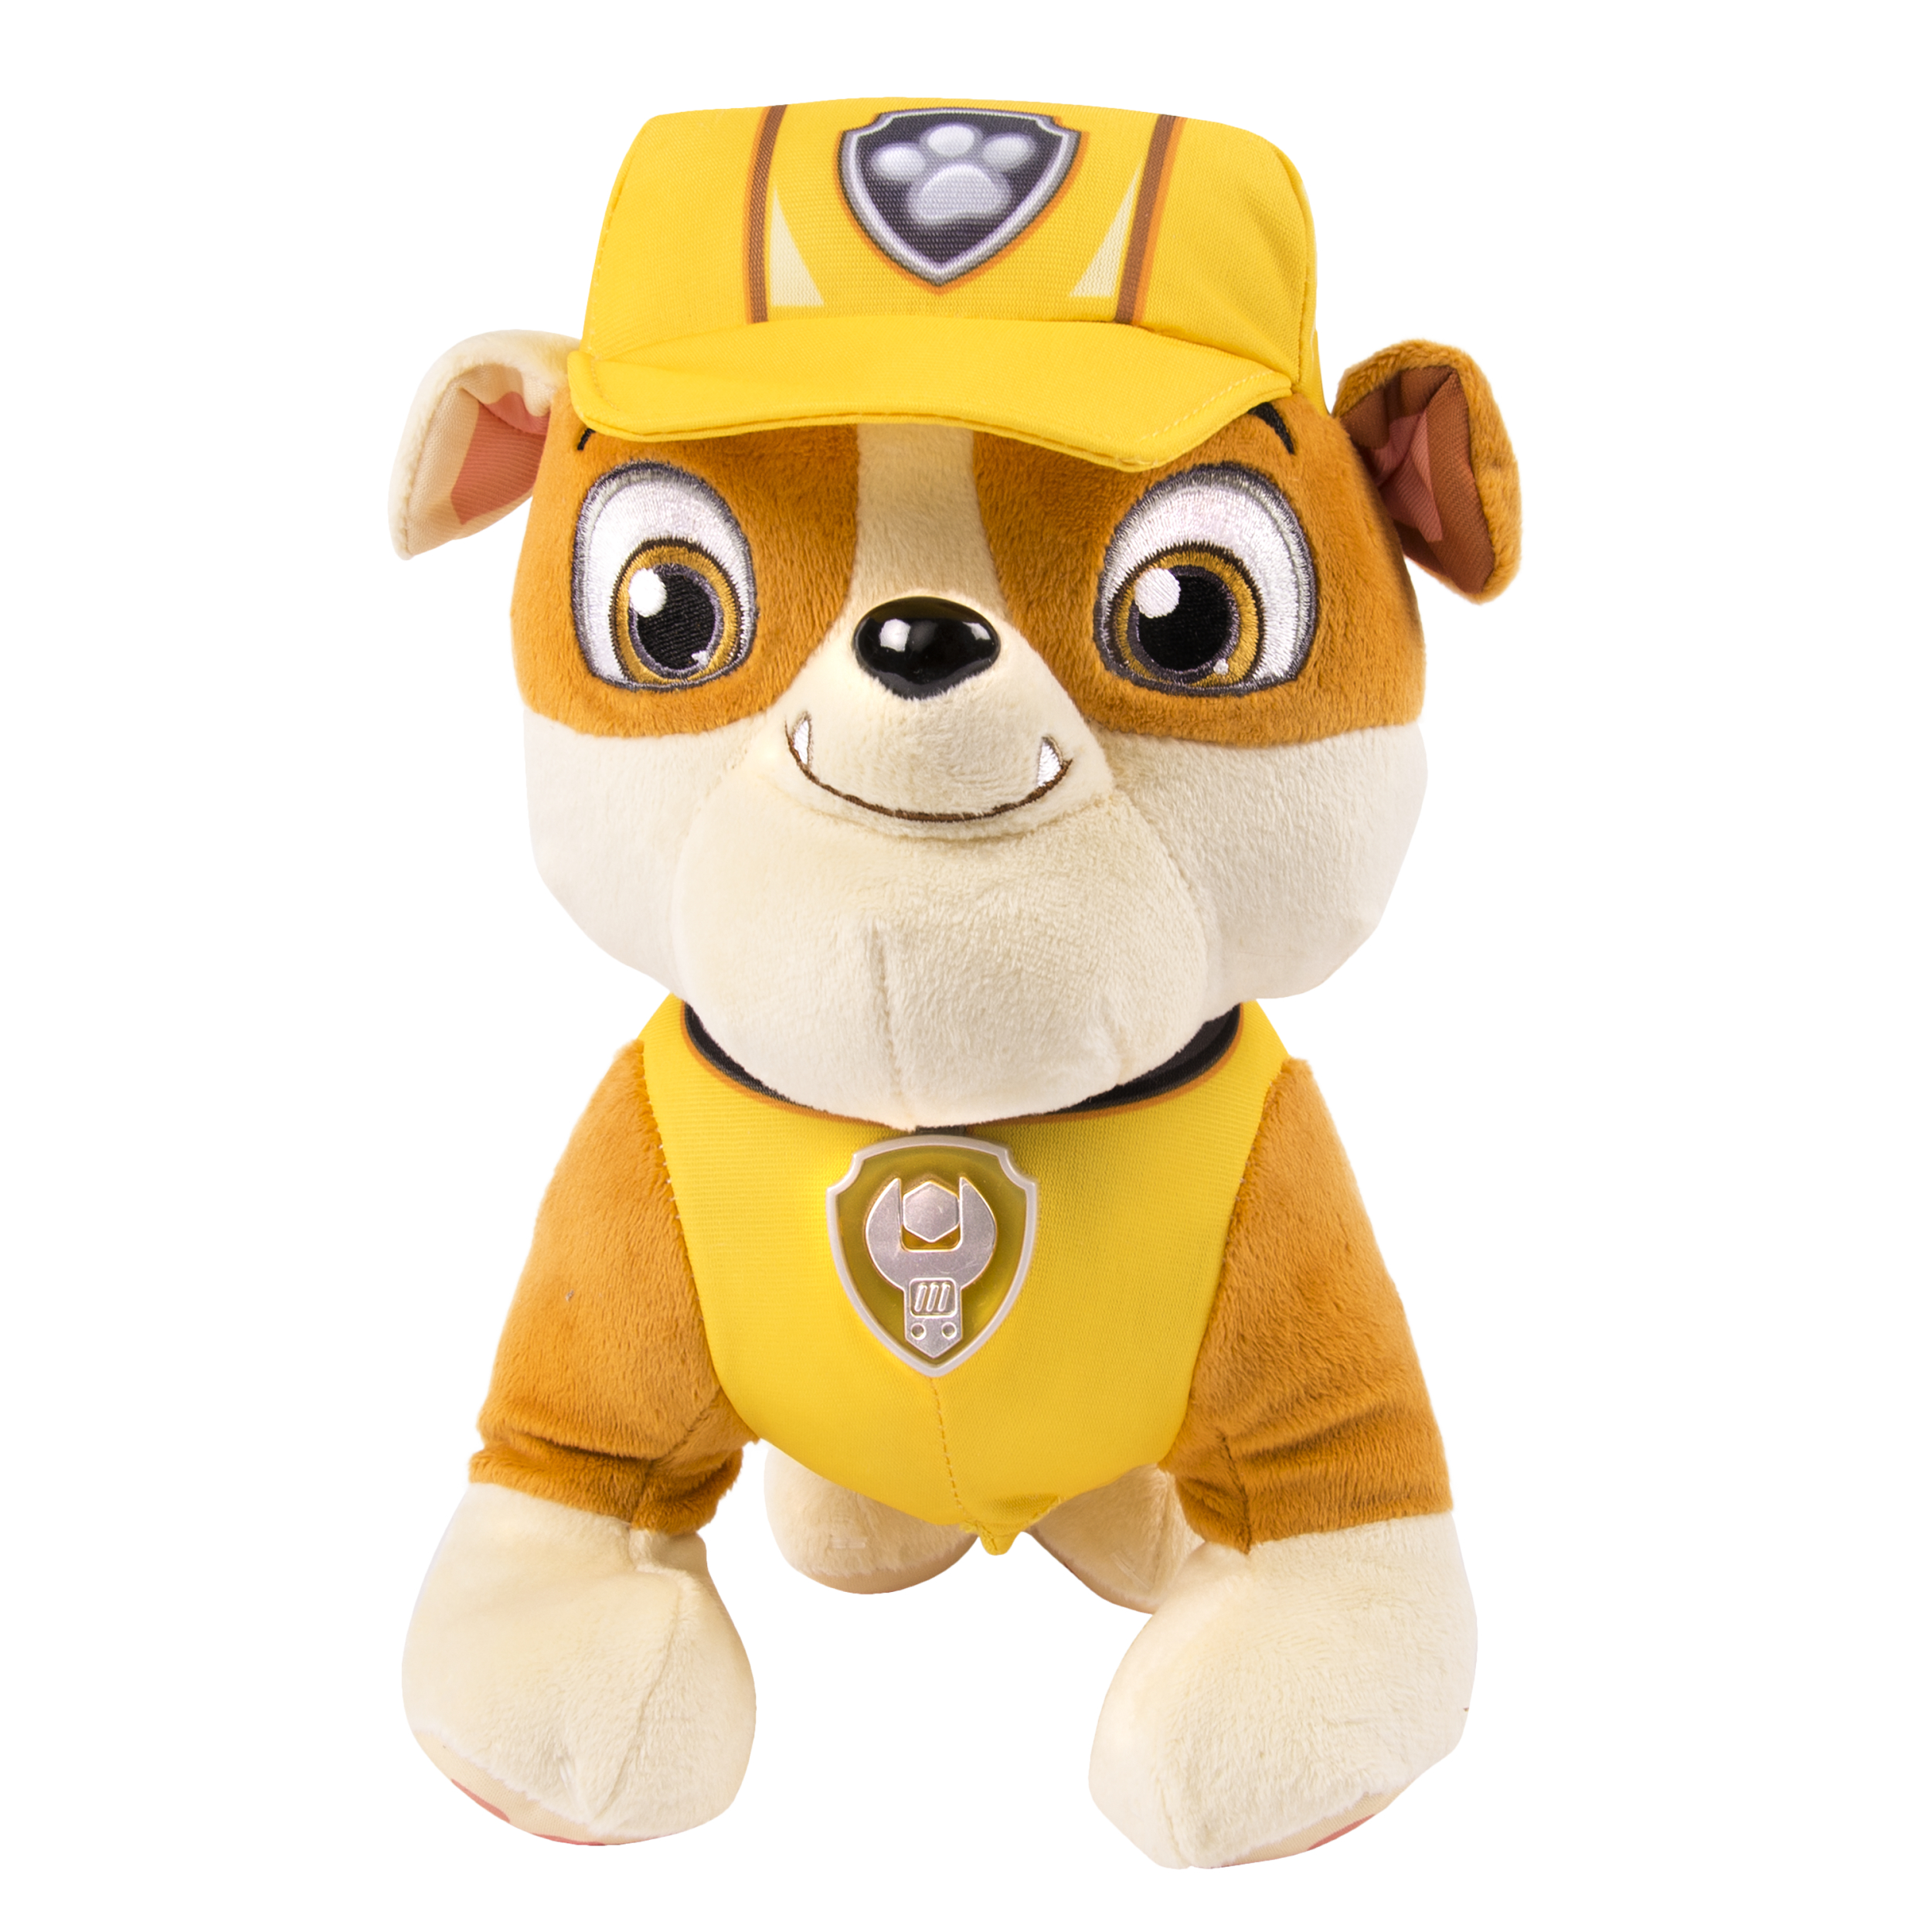 Paw Patrol Deluxe Lights and Sounds Plush, Real Talking Rubble - image 1 of 5